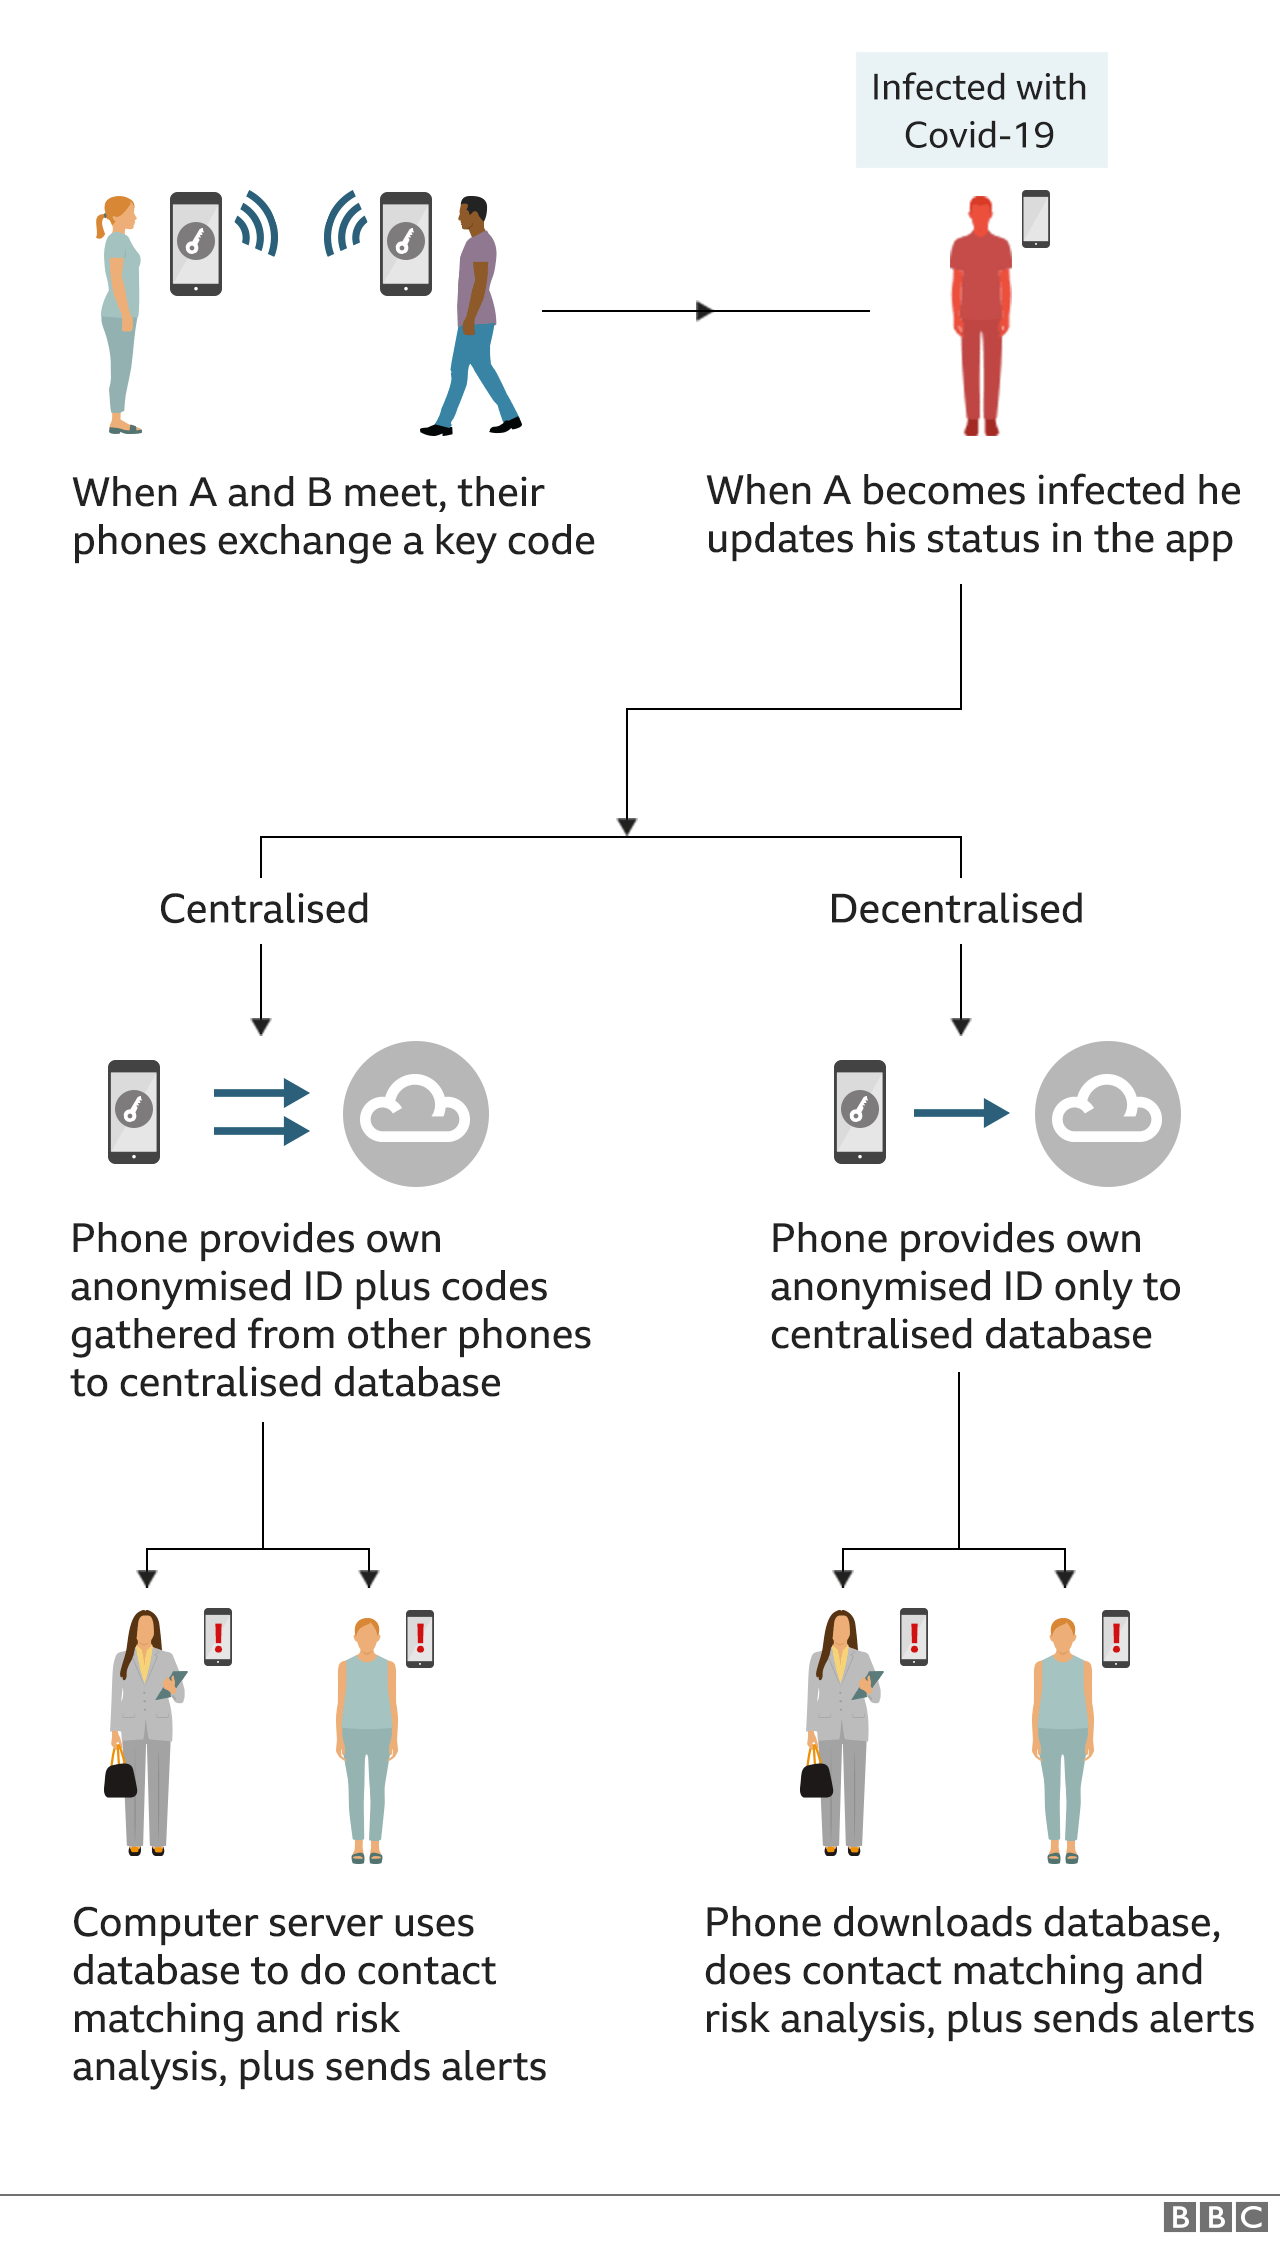 Graphic explaining difference between centralised and decentralised apps